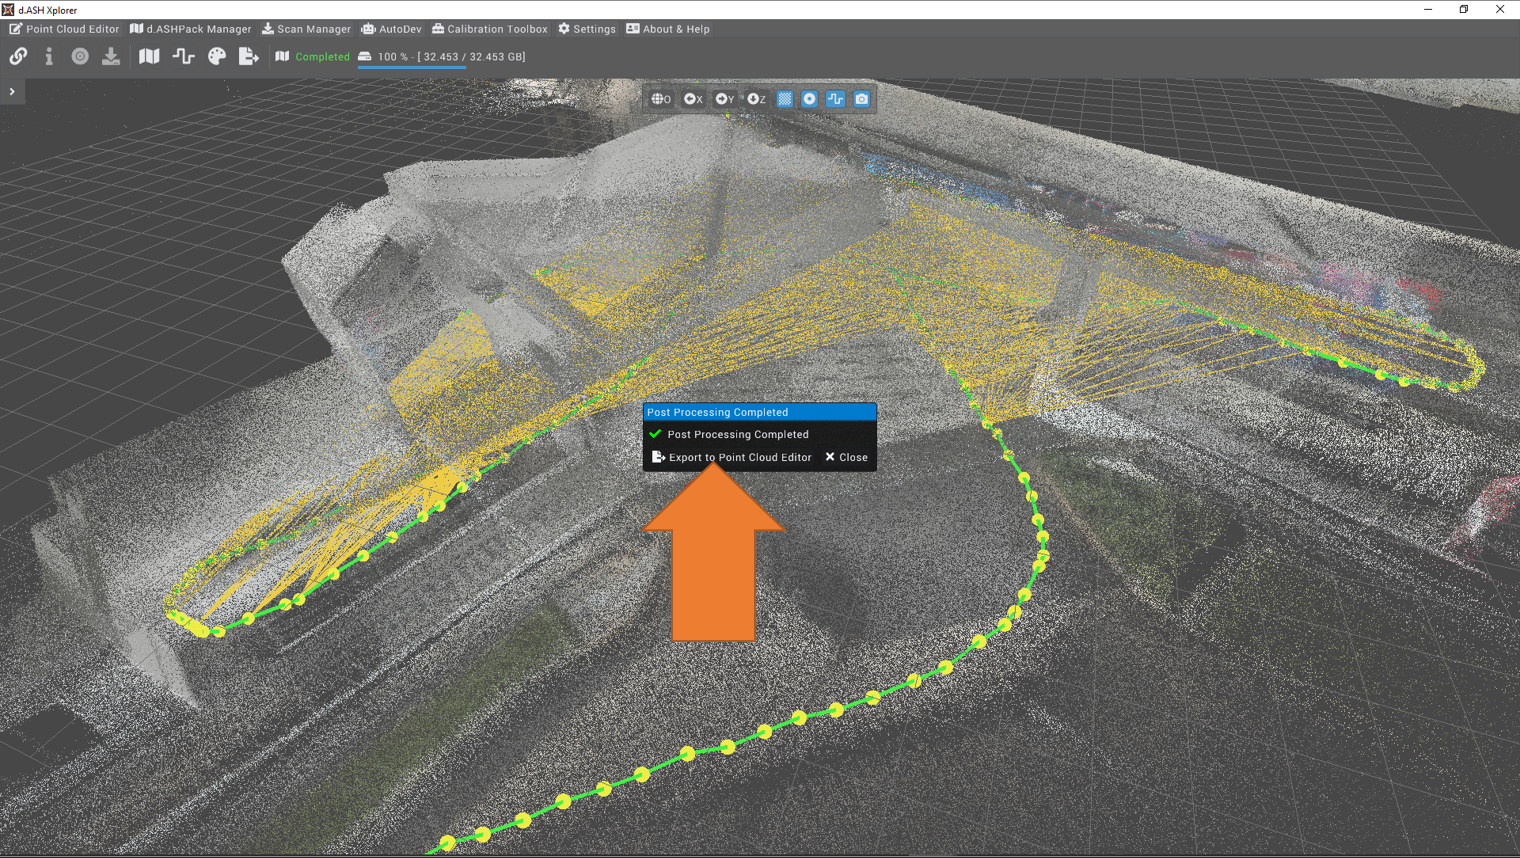 Export To Point Cloud Editor Button